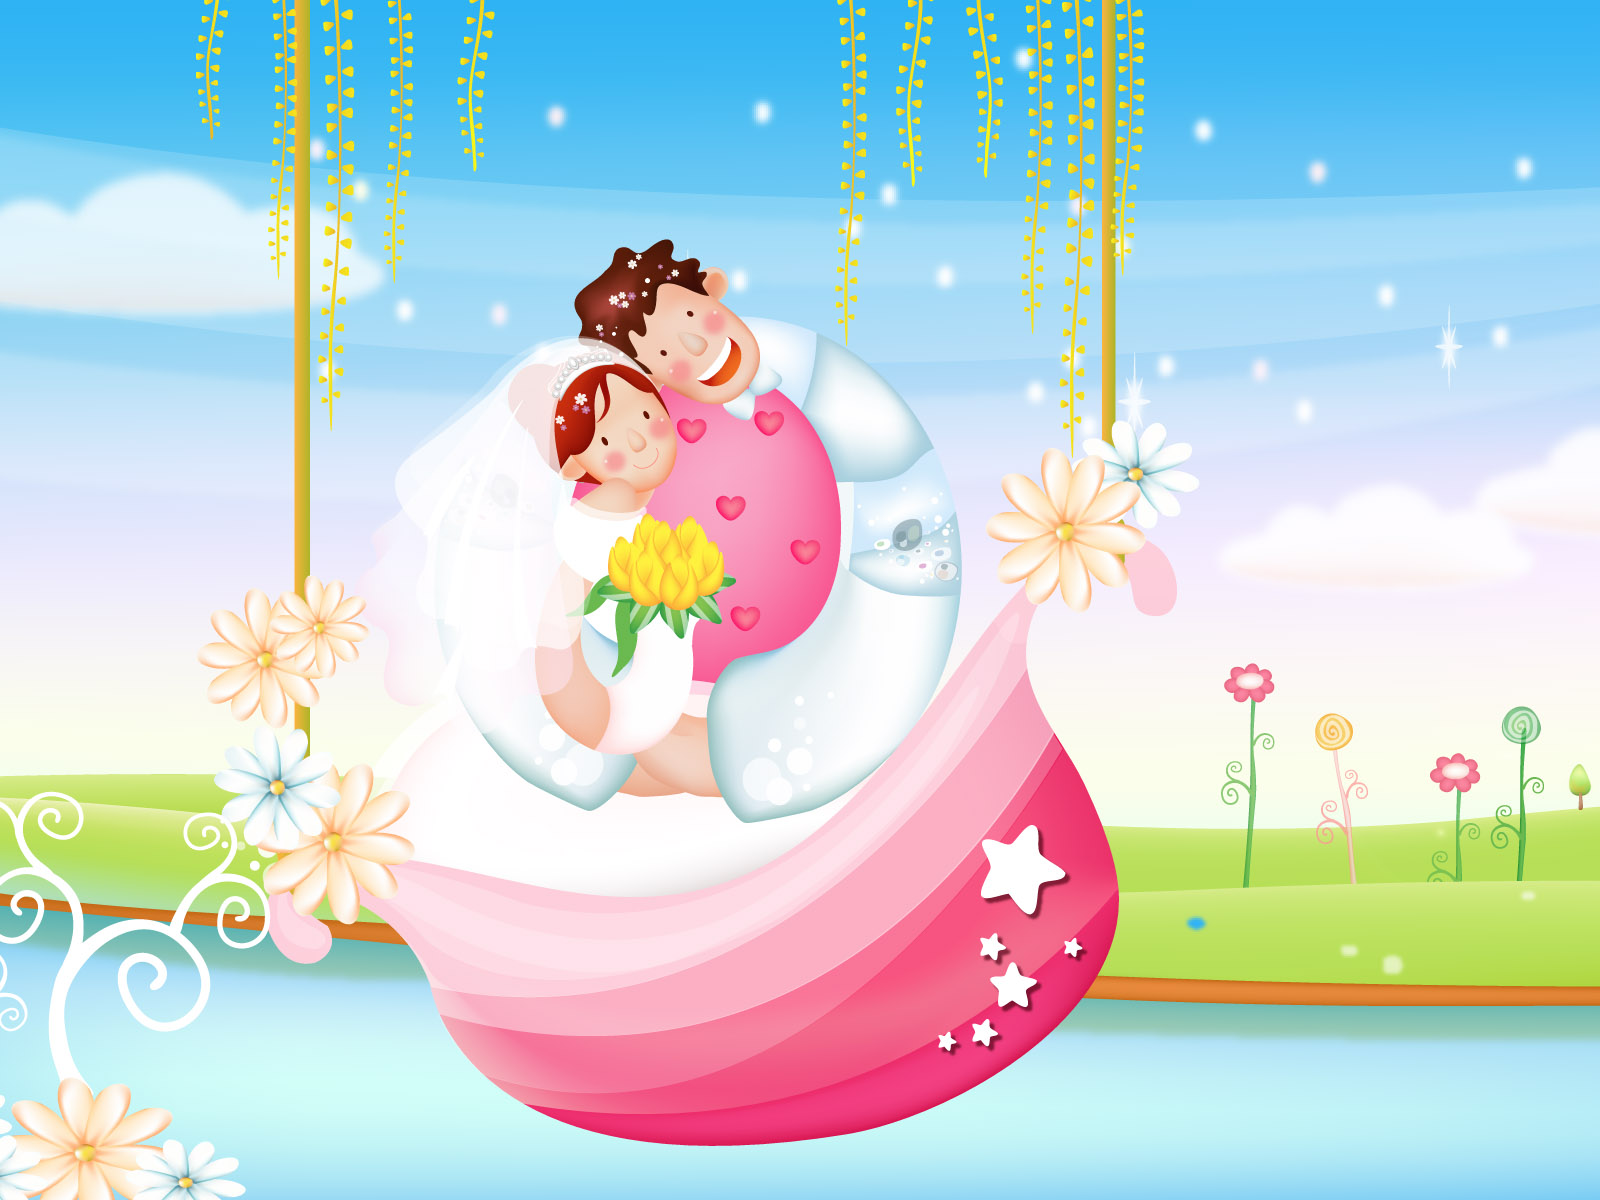 Best Hug Day Wallpaper - 2nd Marriage Anniversary Wishes , HD Wallpaper & Backgrounds